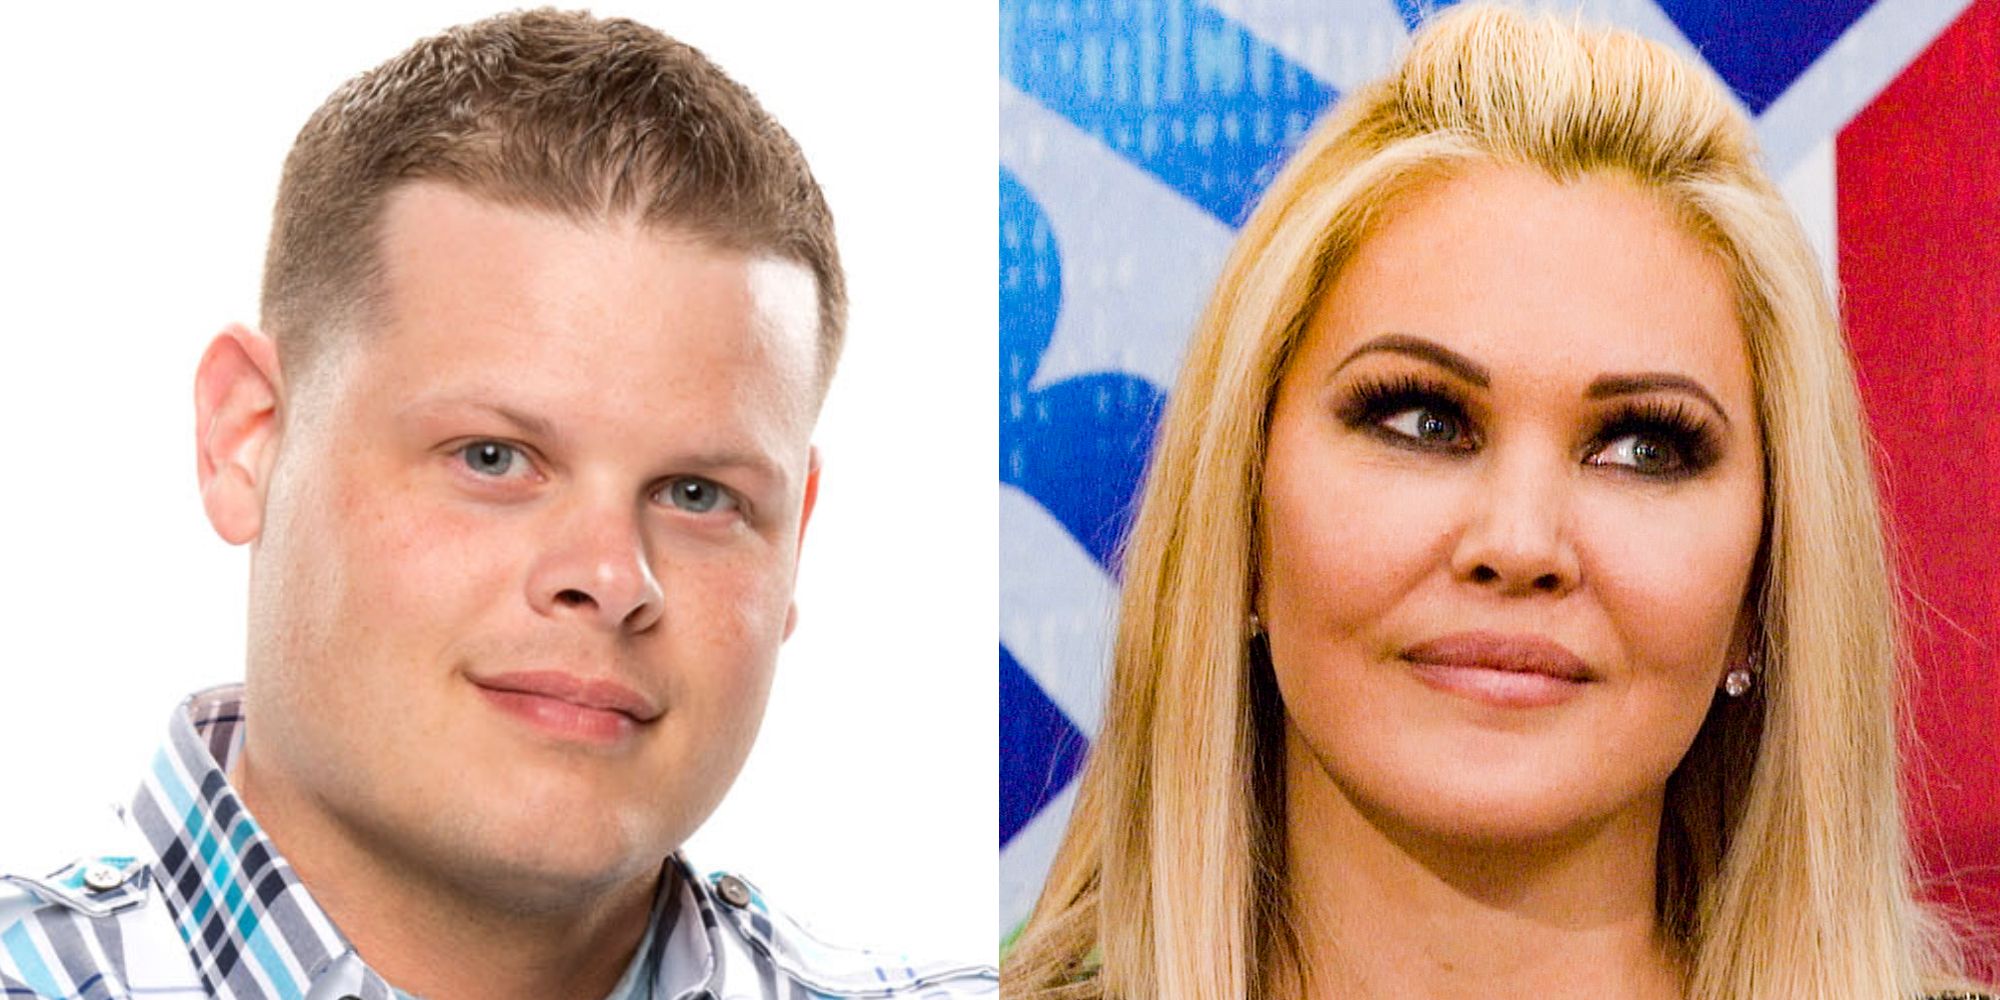 Derrick Levasseur from Big Brother 16 and Shanna Moakler from Celebrity Big Brother 3